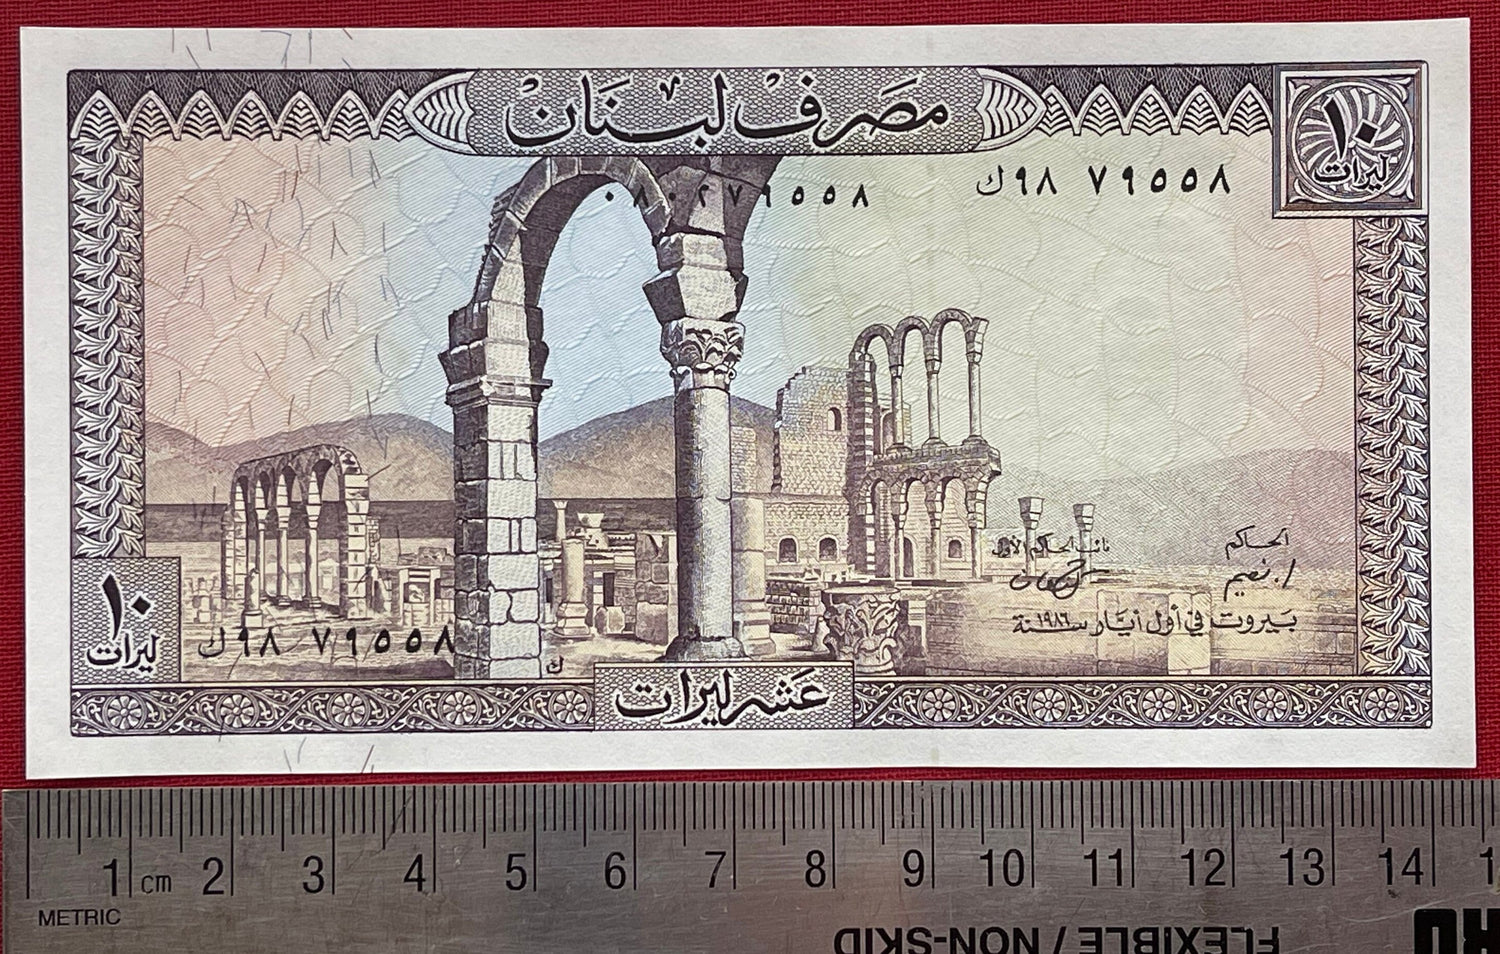 Sea Monster that Medusa and Perseus turned into Rock & Umayyad Palace 10 Livres Lebanon Authentic Banknote Money for Collage (Raouché) Cetus